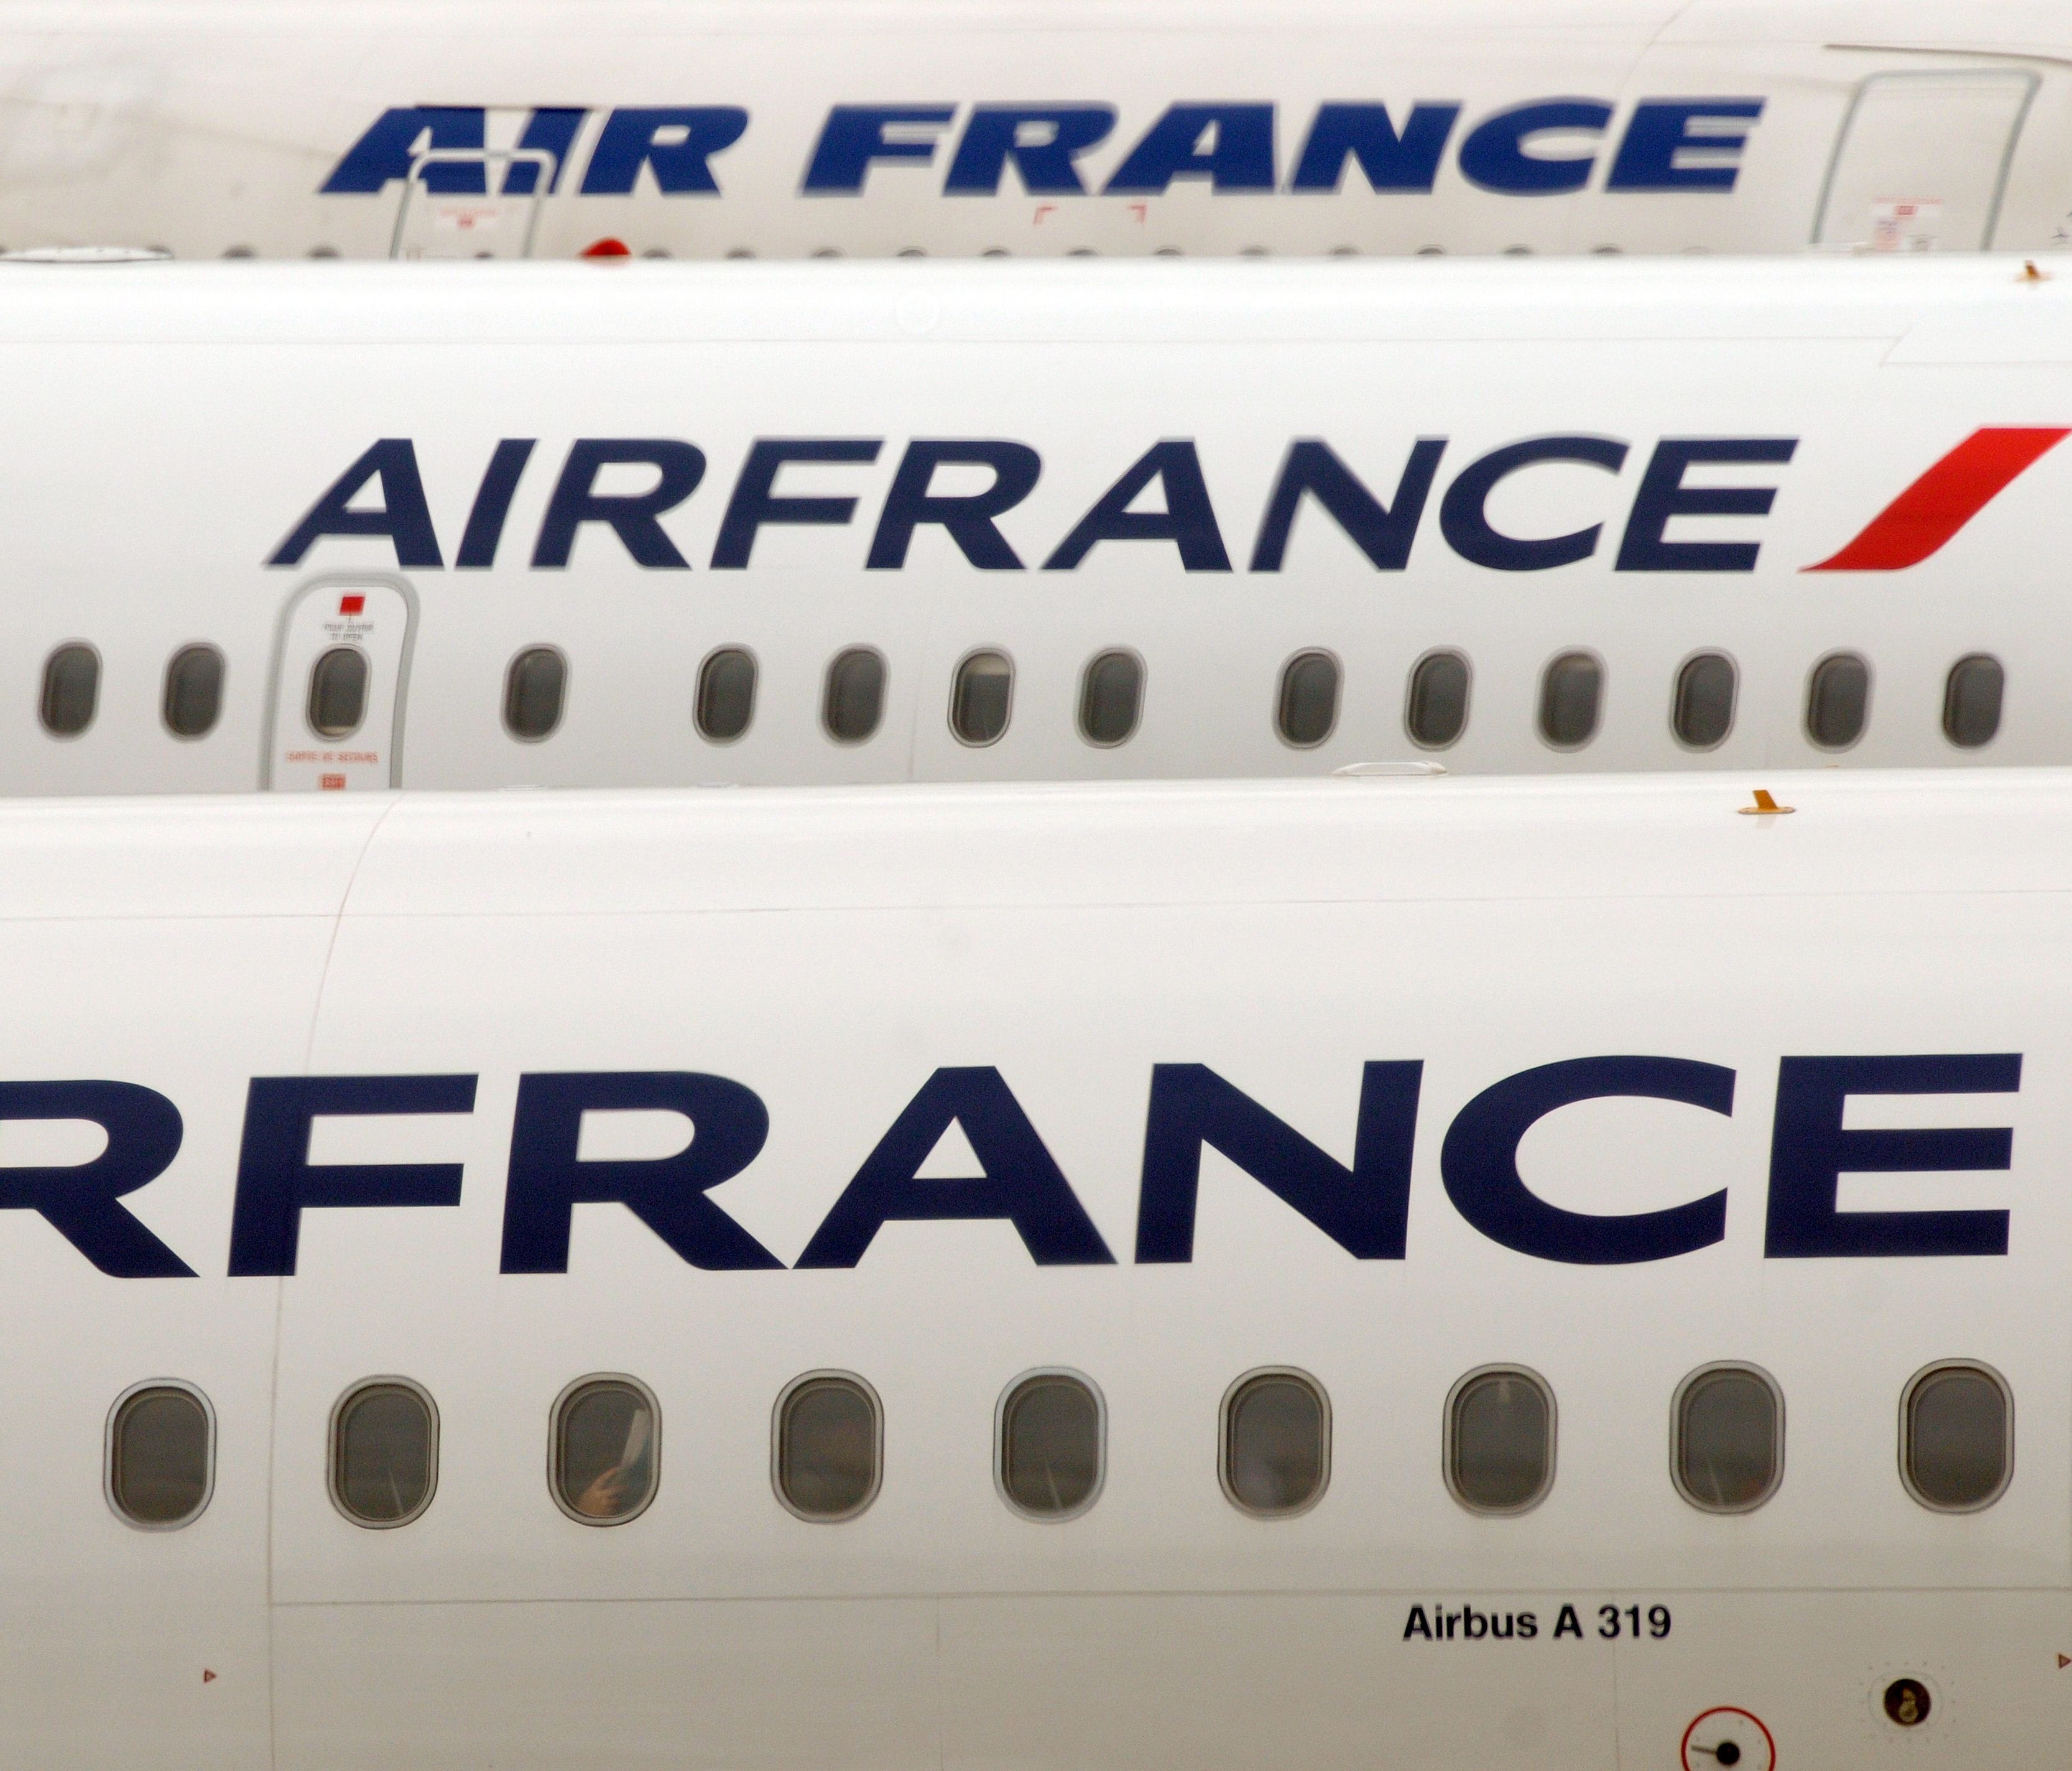 (FILES) A picture taken on October 10, 2013 shows Air France planes on the tarmac of Roissy Charles-de-Gaulle airport outside Paris. The union representing most of Air France's pilots (SNPL AF Alpa) has called for a week-long strike in September over